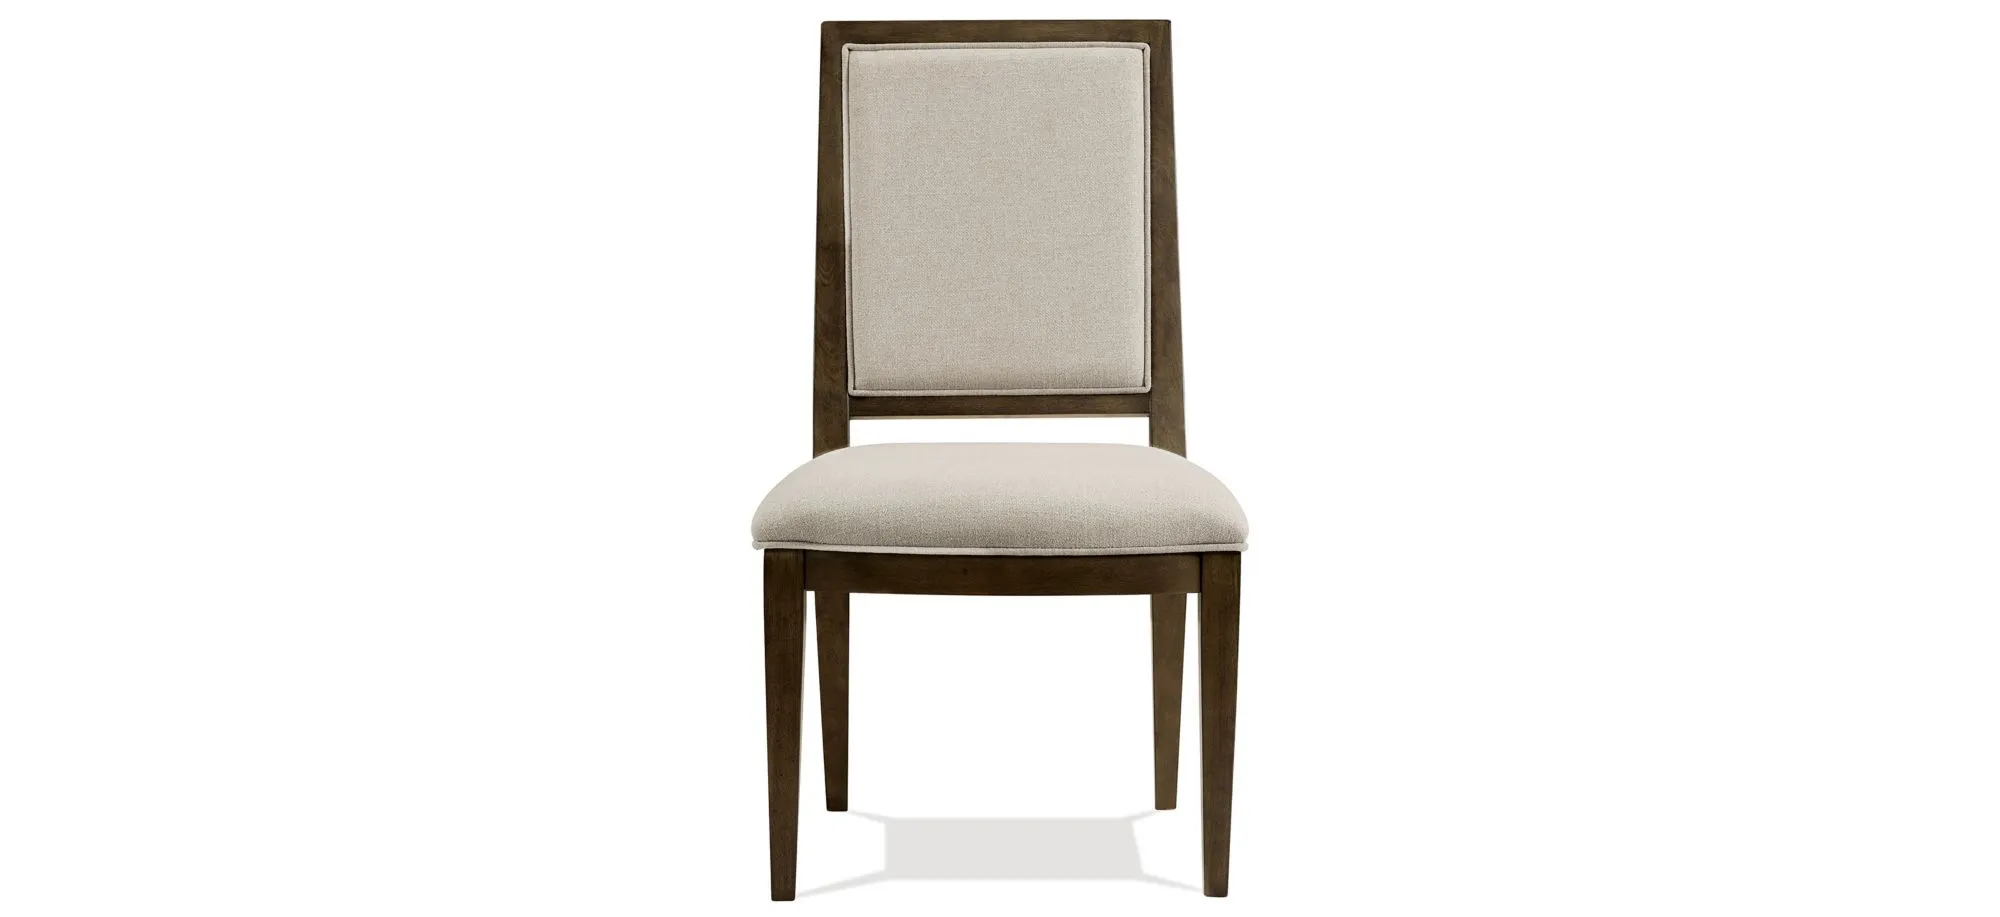 Huntington Park Uph Side Chair 2in - Set of 2 in Mink by Riverside Furniture